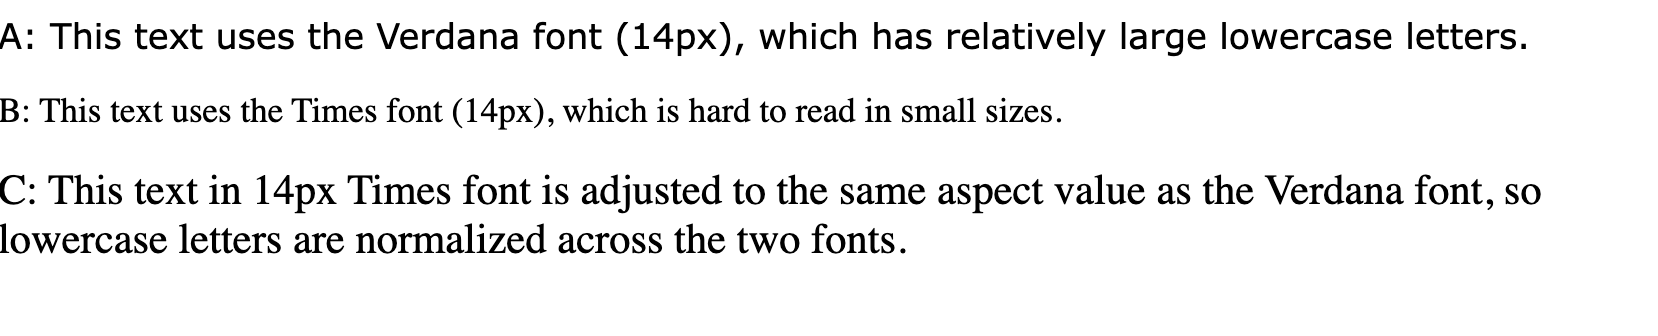 Text lines that read 'This text uses the verdana font (14px), which has relatively large lowercase letters', 'This uses Times font (14px), which is hard to read in small sizes' and 'This text in 14px Times font is adjusted to the same aspect value as the Verdana font, so lowercase fonts are normalized across the two fonts